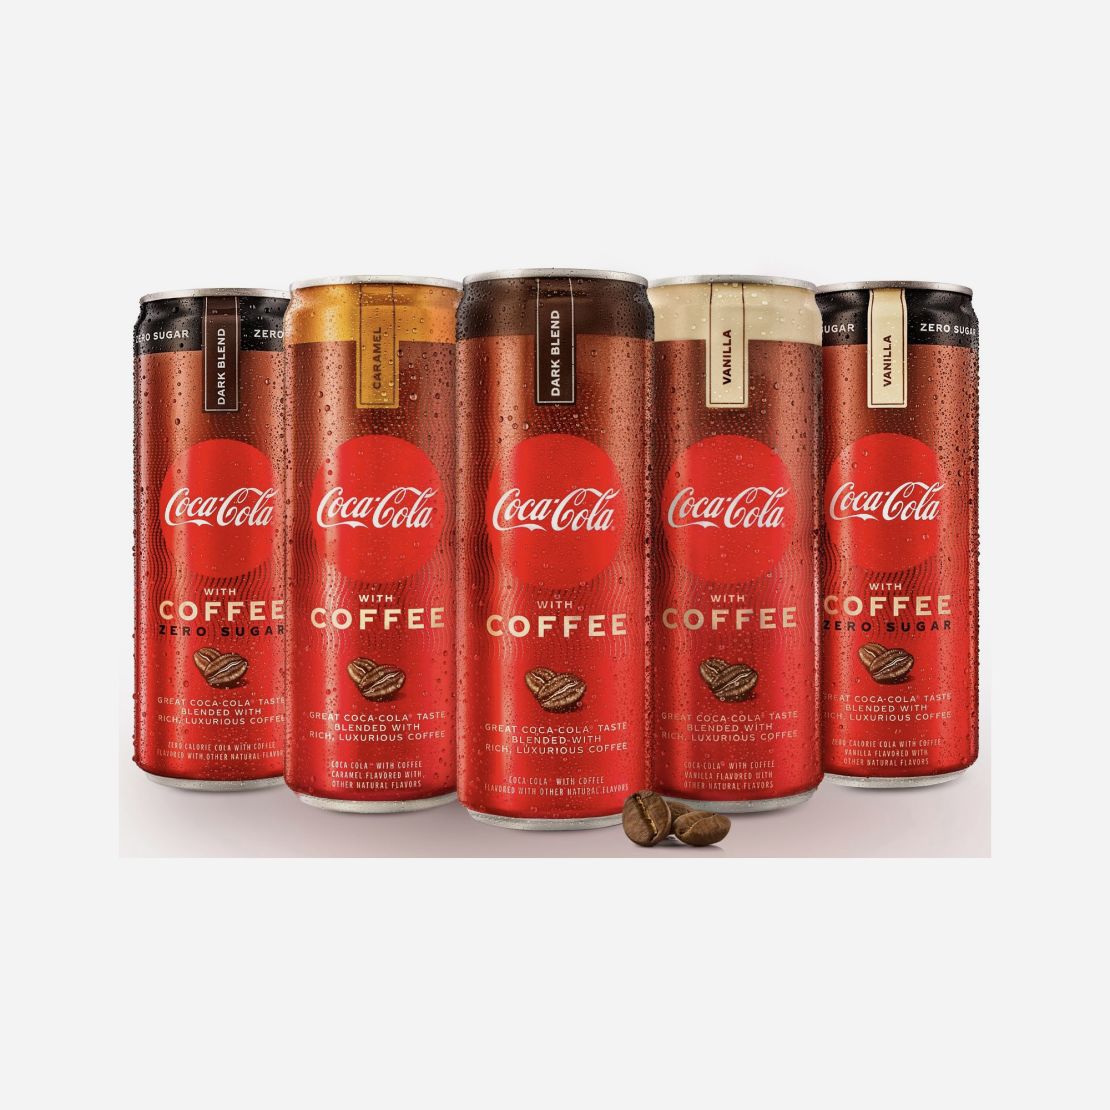 Coke wih Coffee arrives at US stores on Monday. 